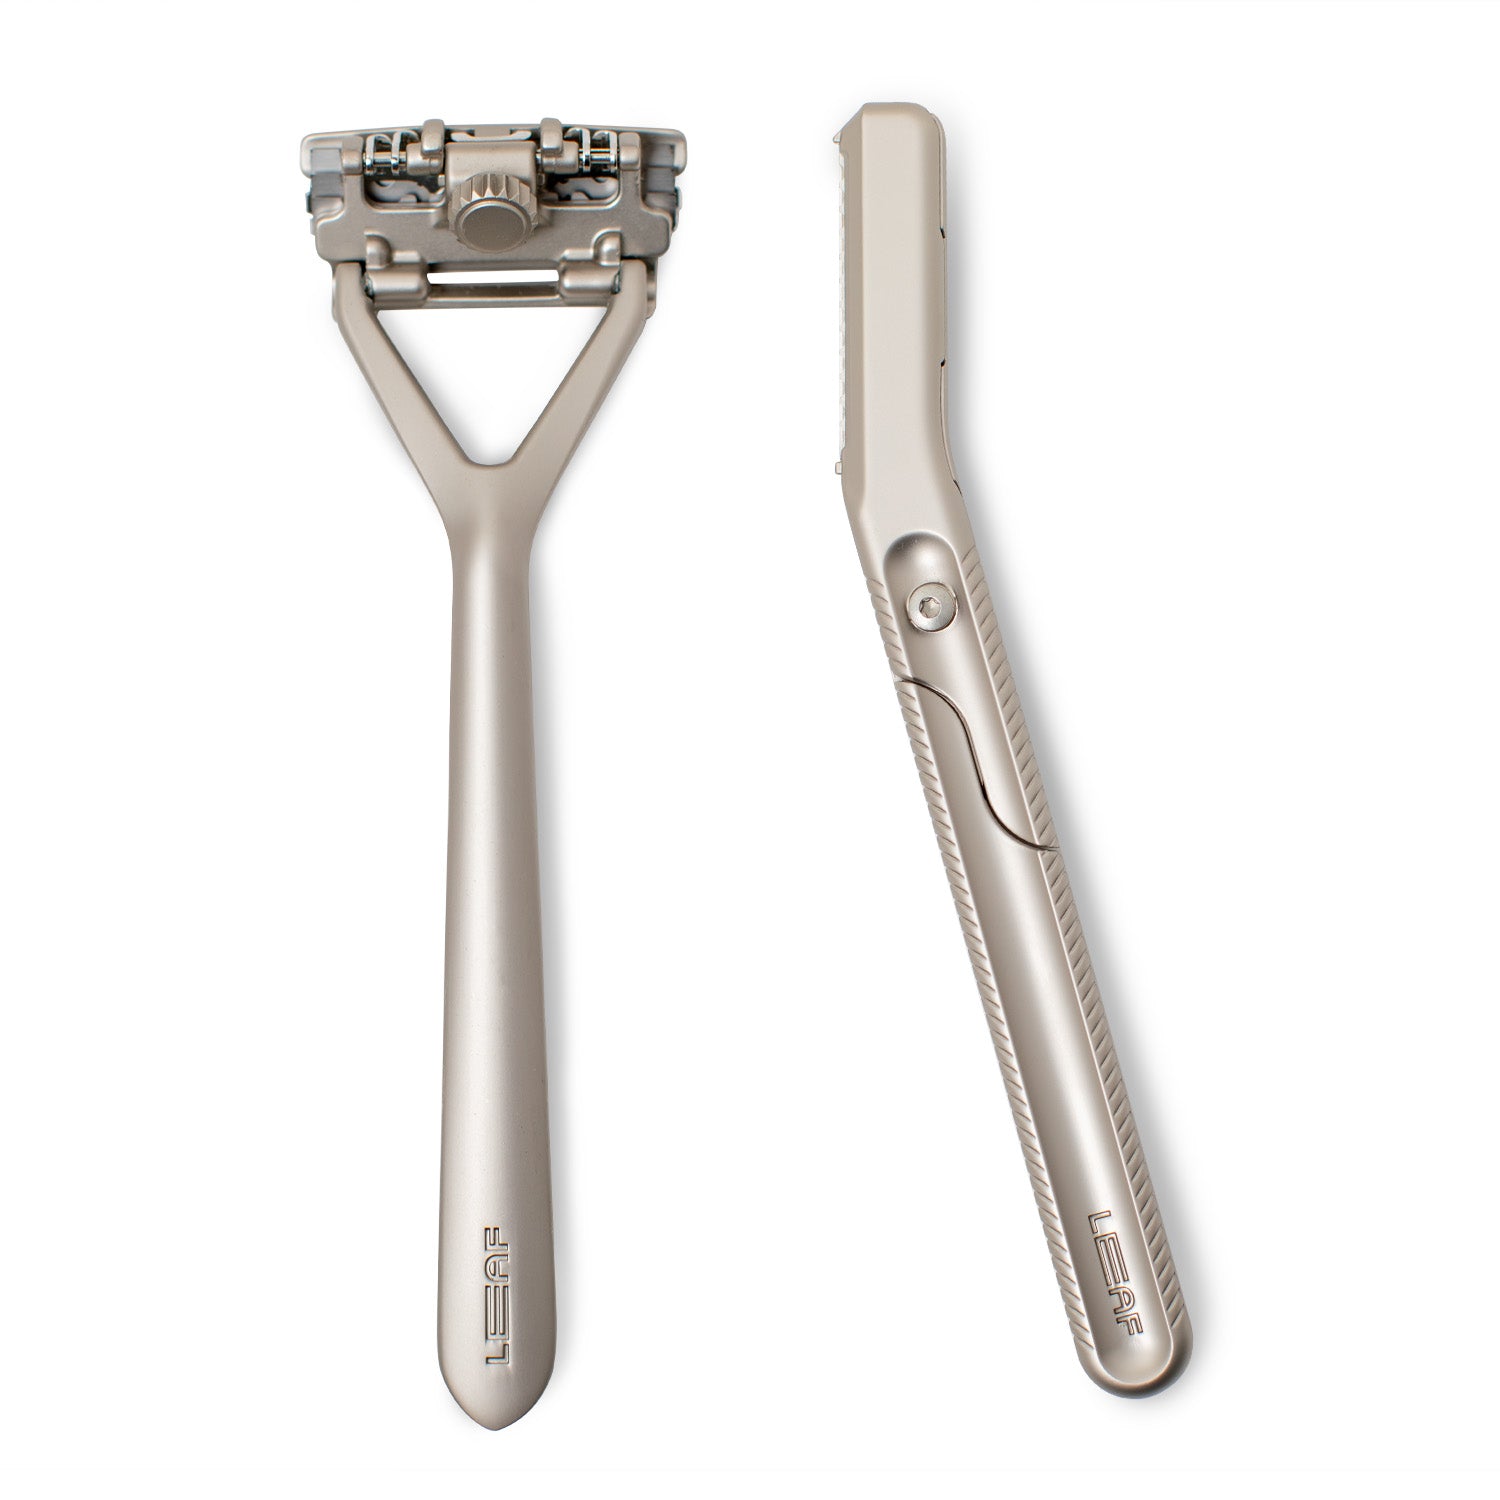 This image contains Leaf Shave brand Leaf and Dermaplaner razors on a white background, in the finish called Silver